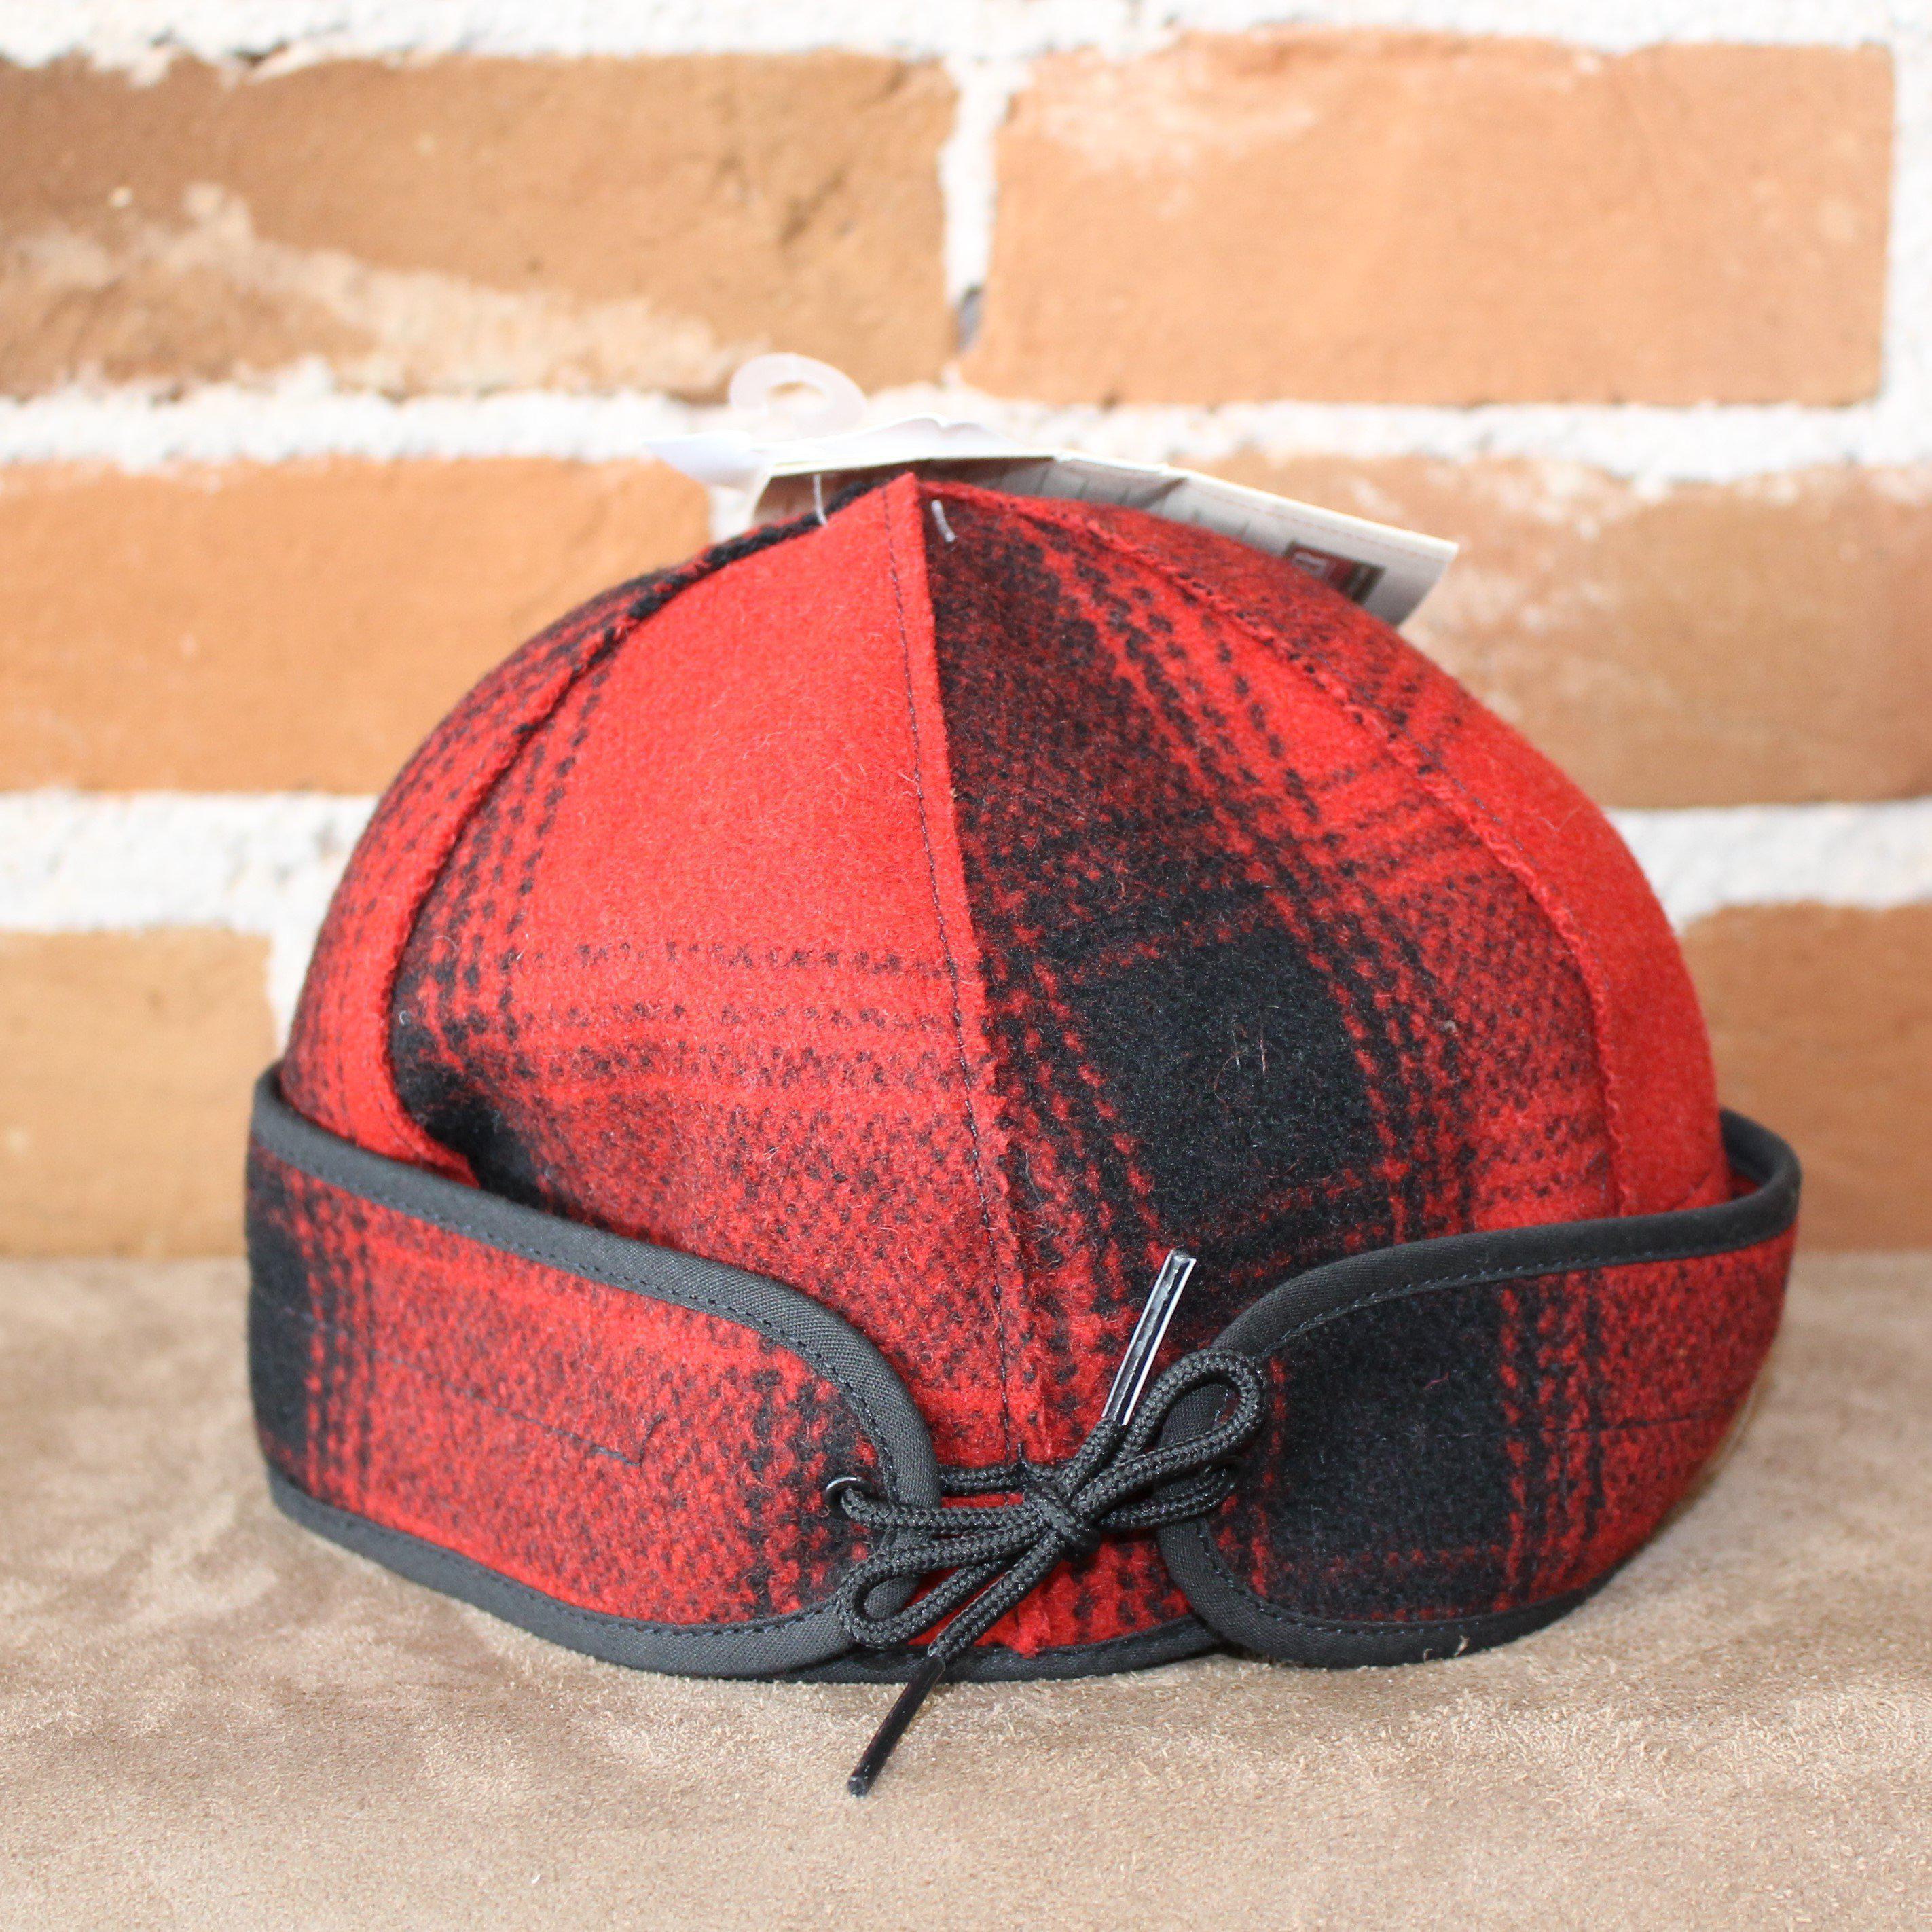 Brimless Cap In Red And – Plaid 79 Atomic Black